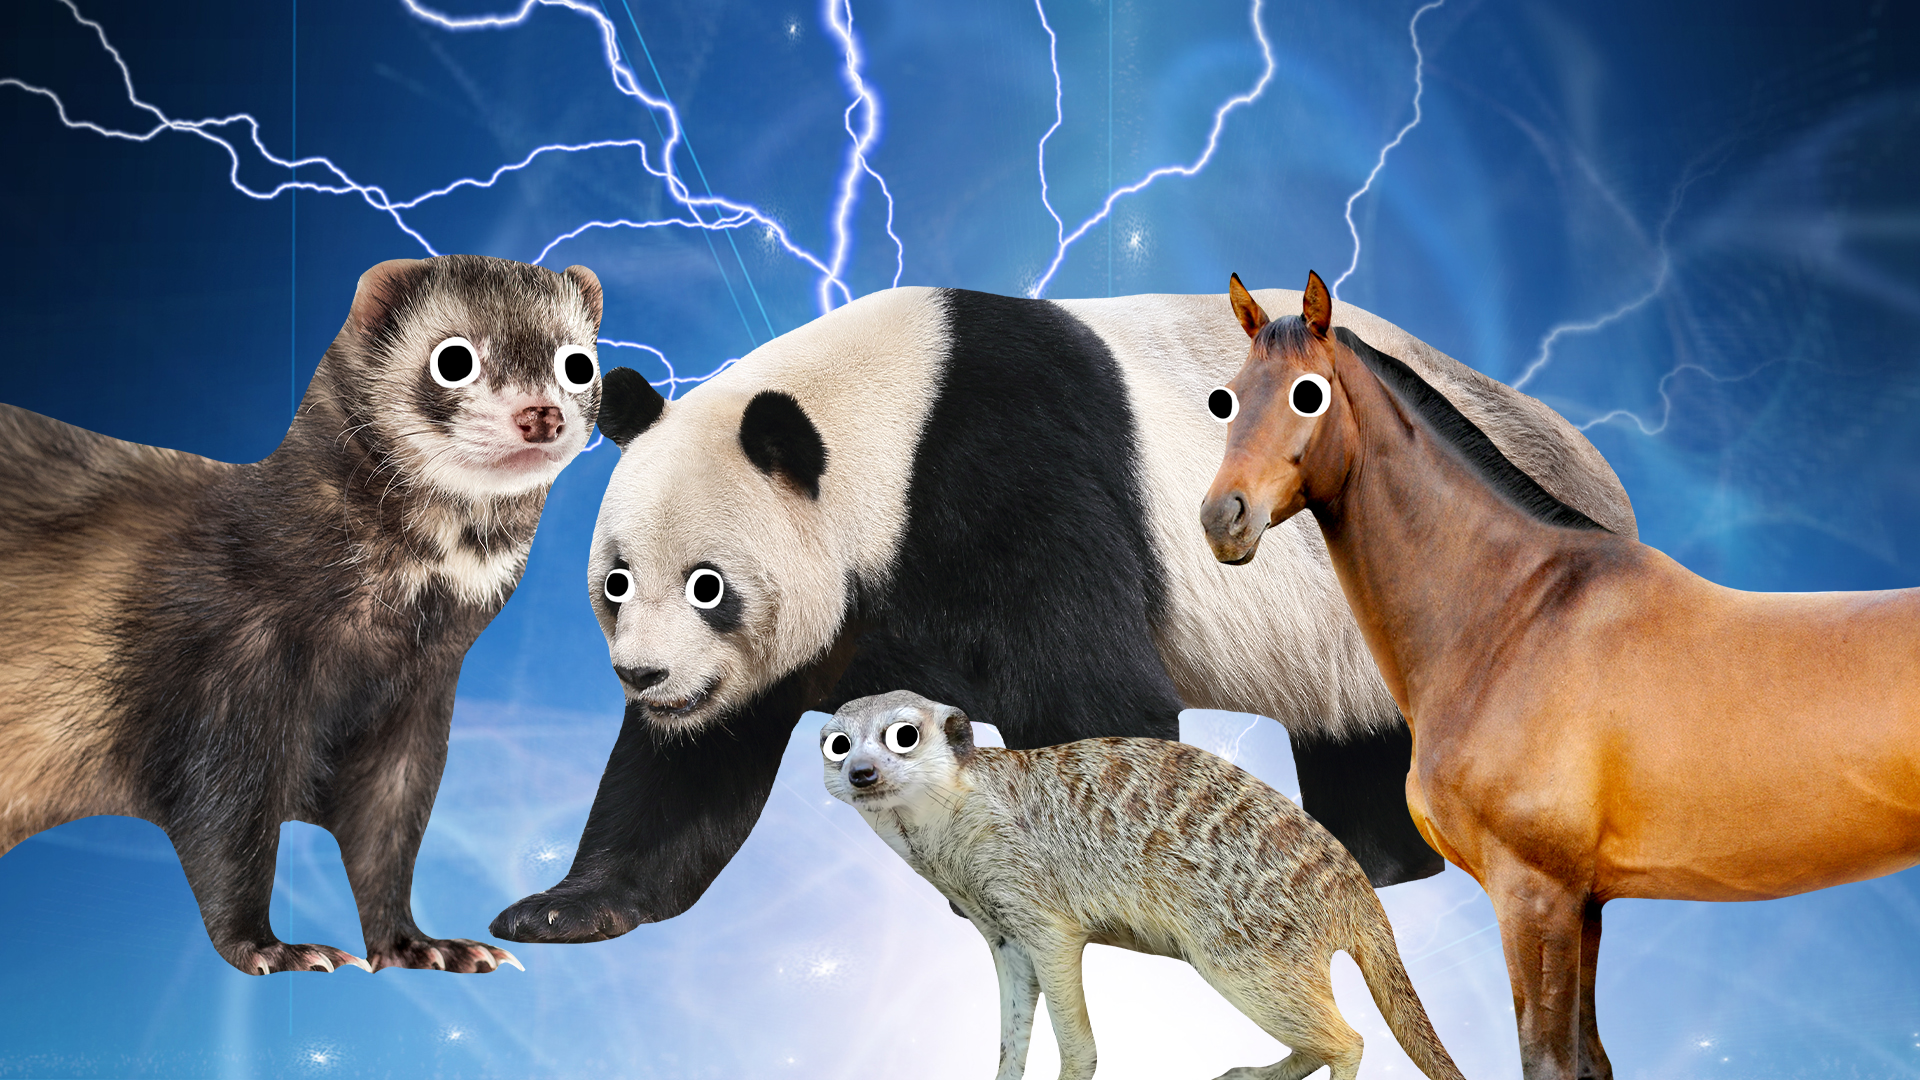 Various Beanoified animals on magic background